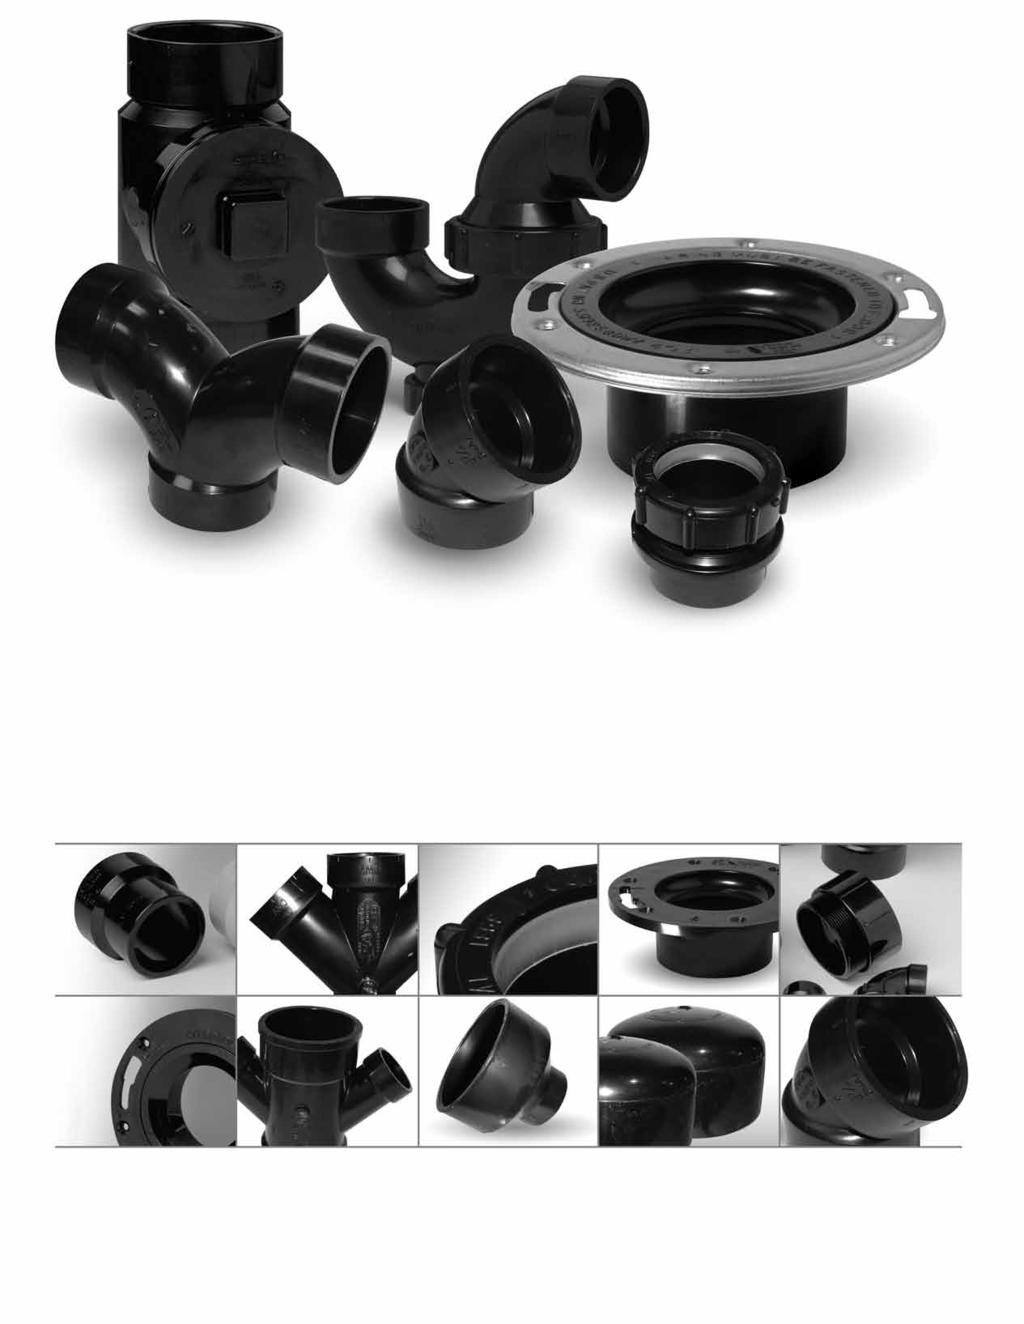 LIST C10-11-111 ABS DWV FITTINGS APRIL 1, 2013 SUPERSEDES C10-11-110 (JUNE 1, 2012) Our website pricing is the current list price and may vary from our printed